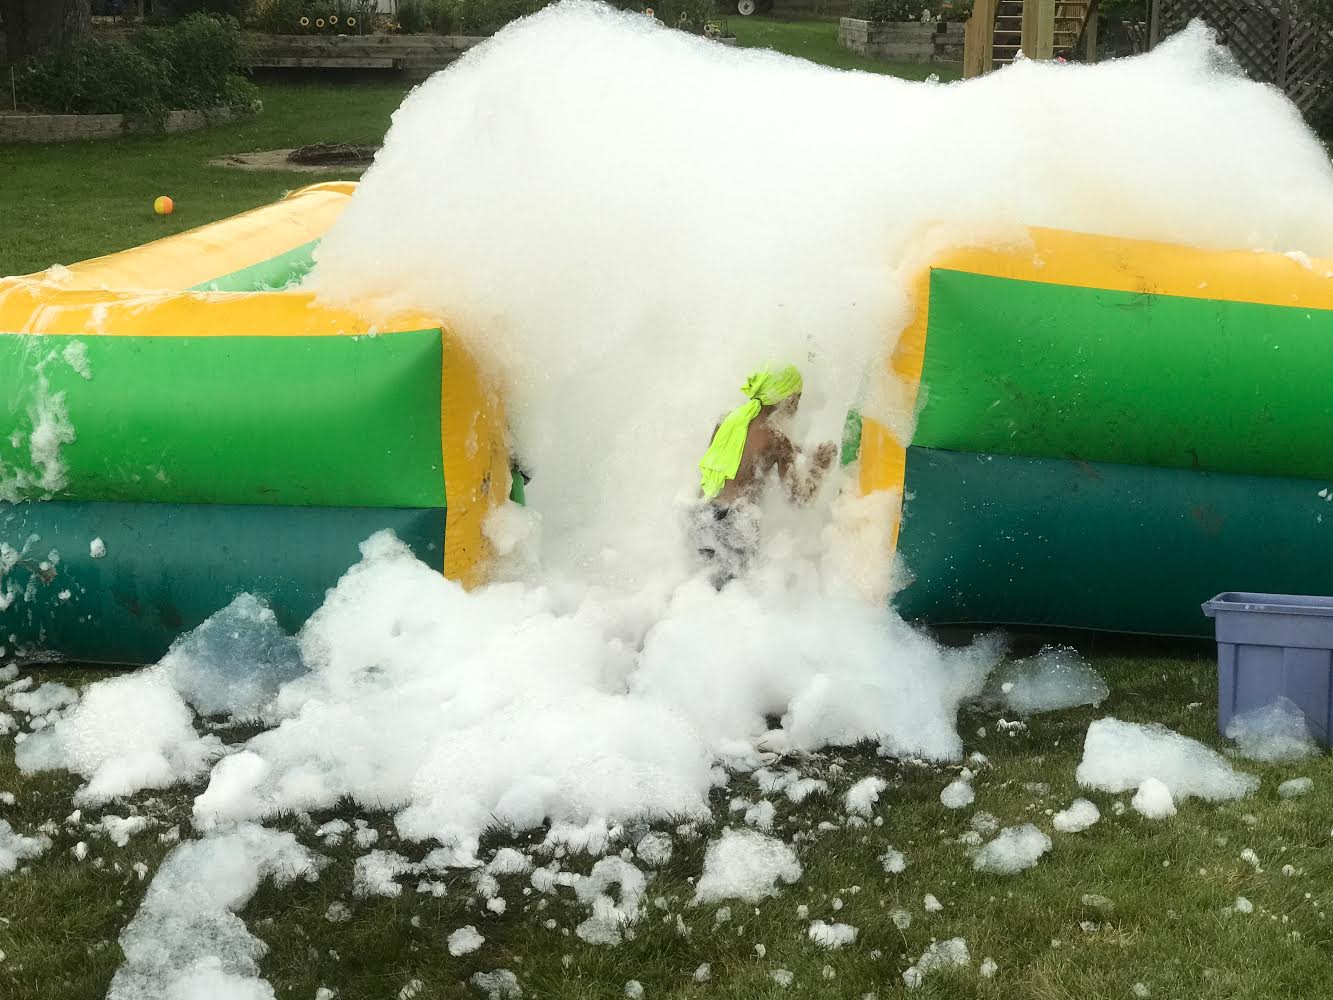 How a non-toxic foam pit was toxic to my weekend